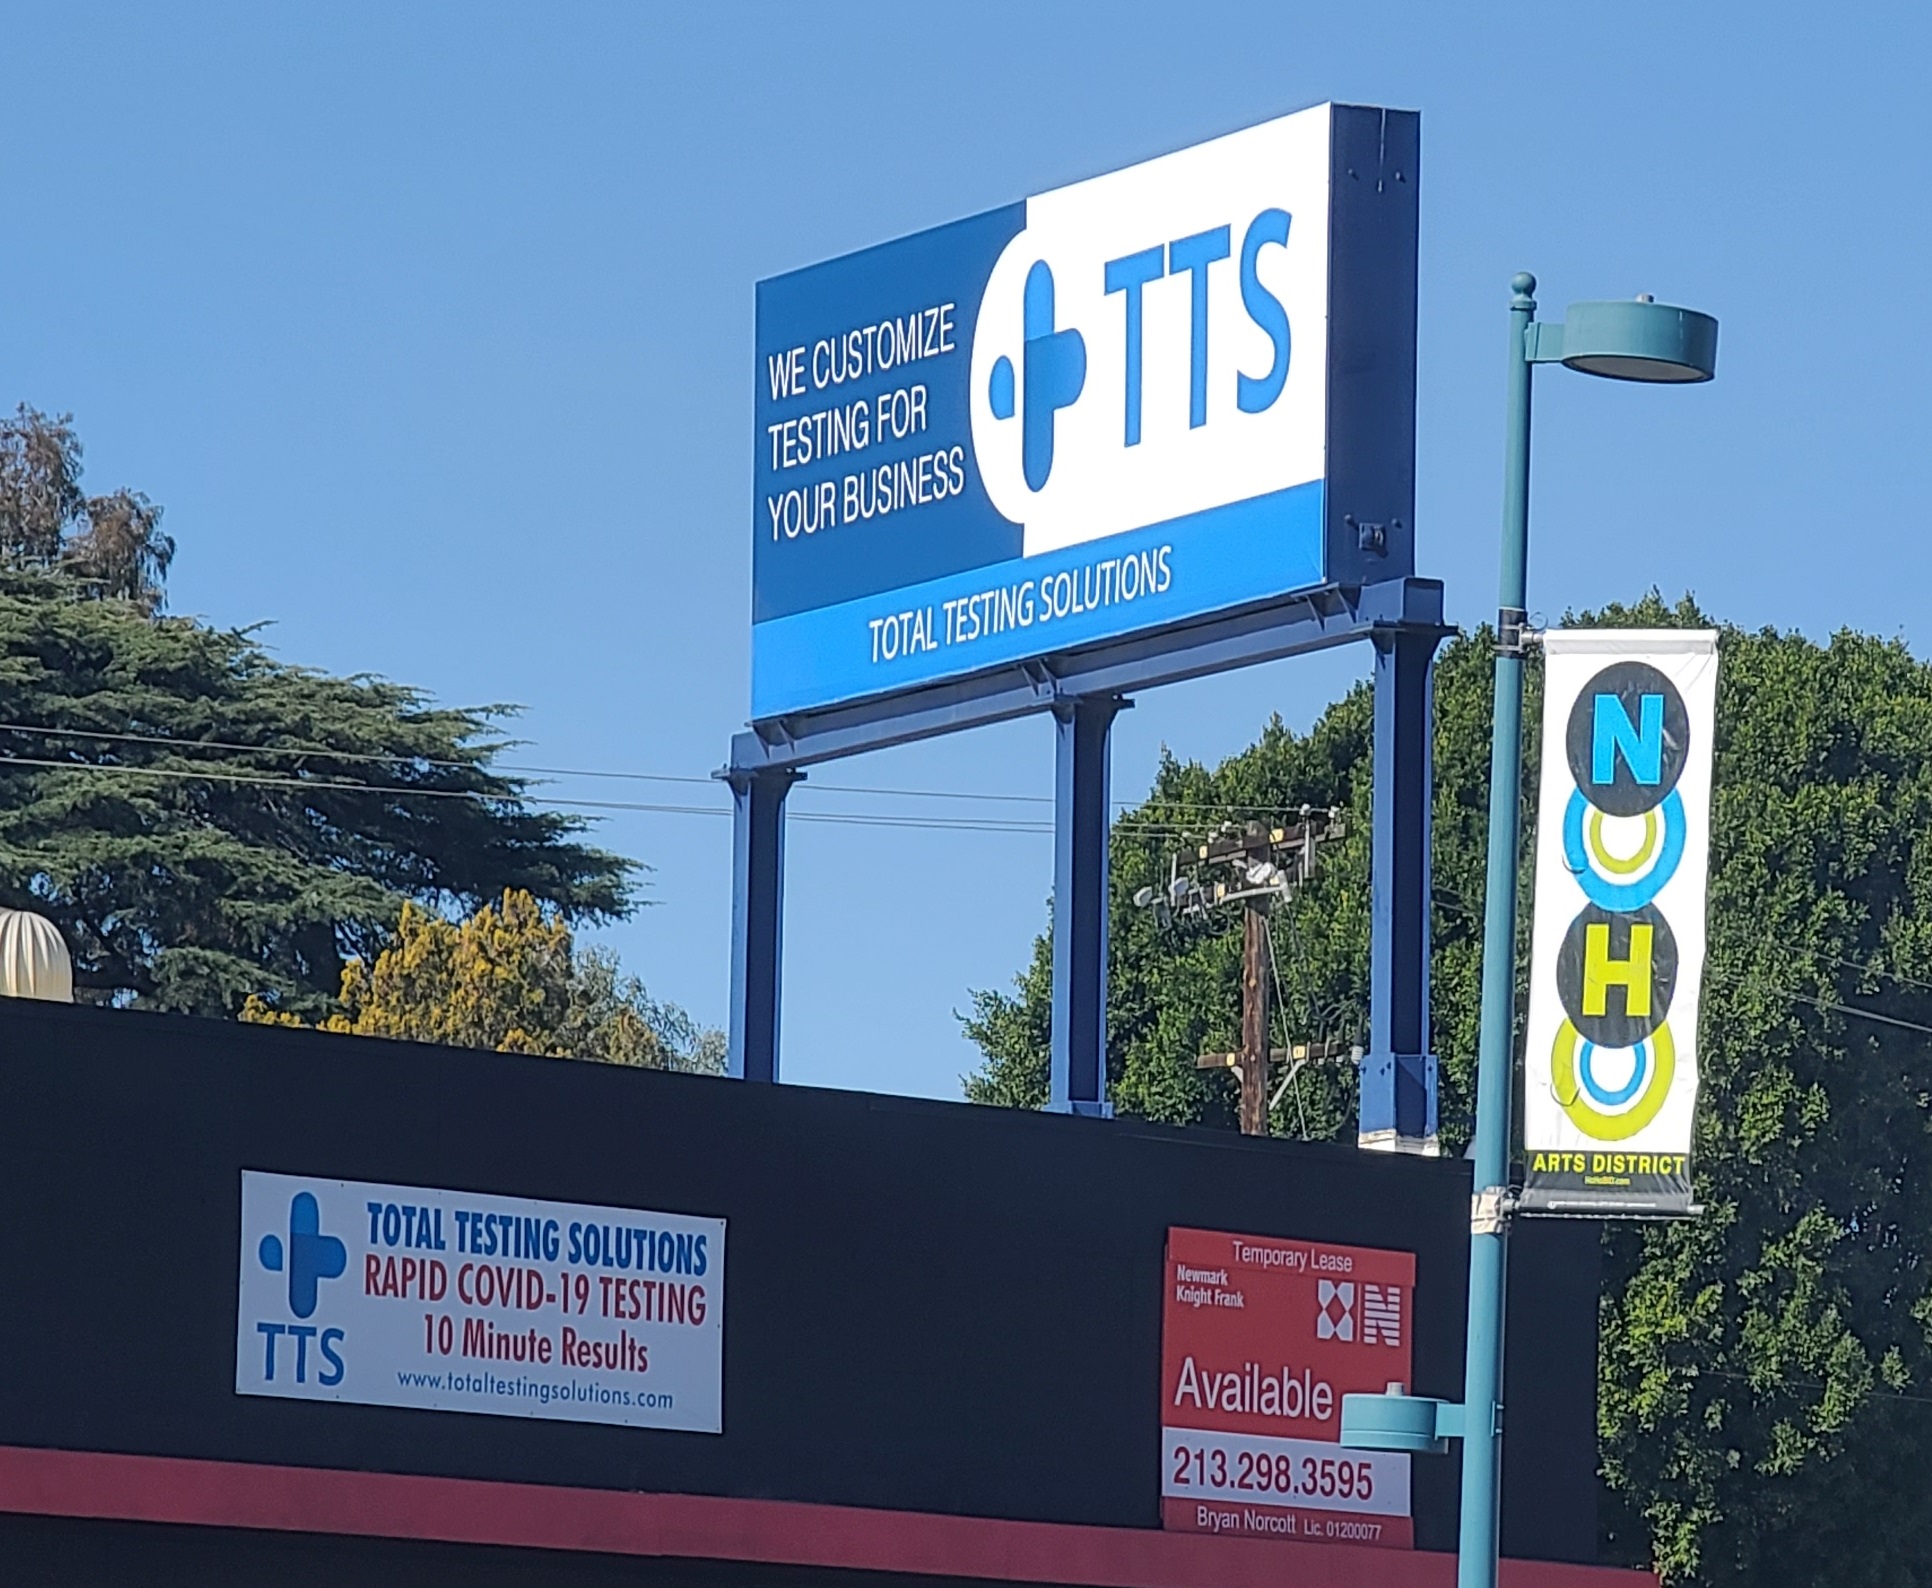 For this custom banner for Total Testing Solutions' North Hollywood location we wrapped an existing lightbox with to use the pylon sign's vantage point to the banner's advantage. It fits like a glove!